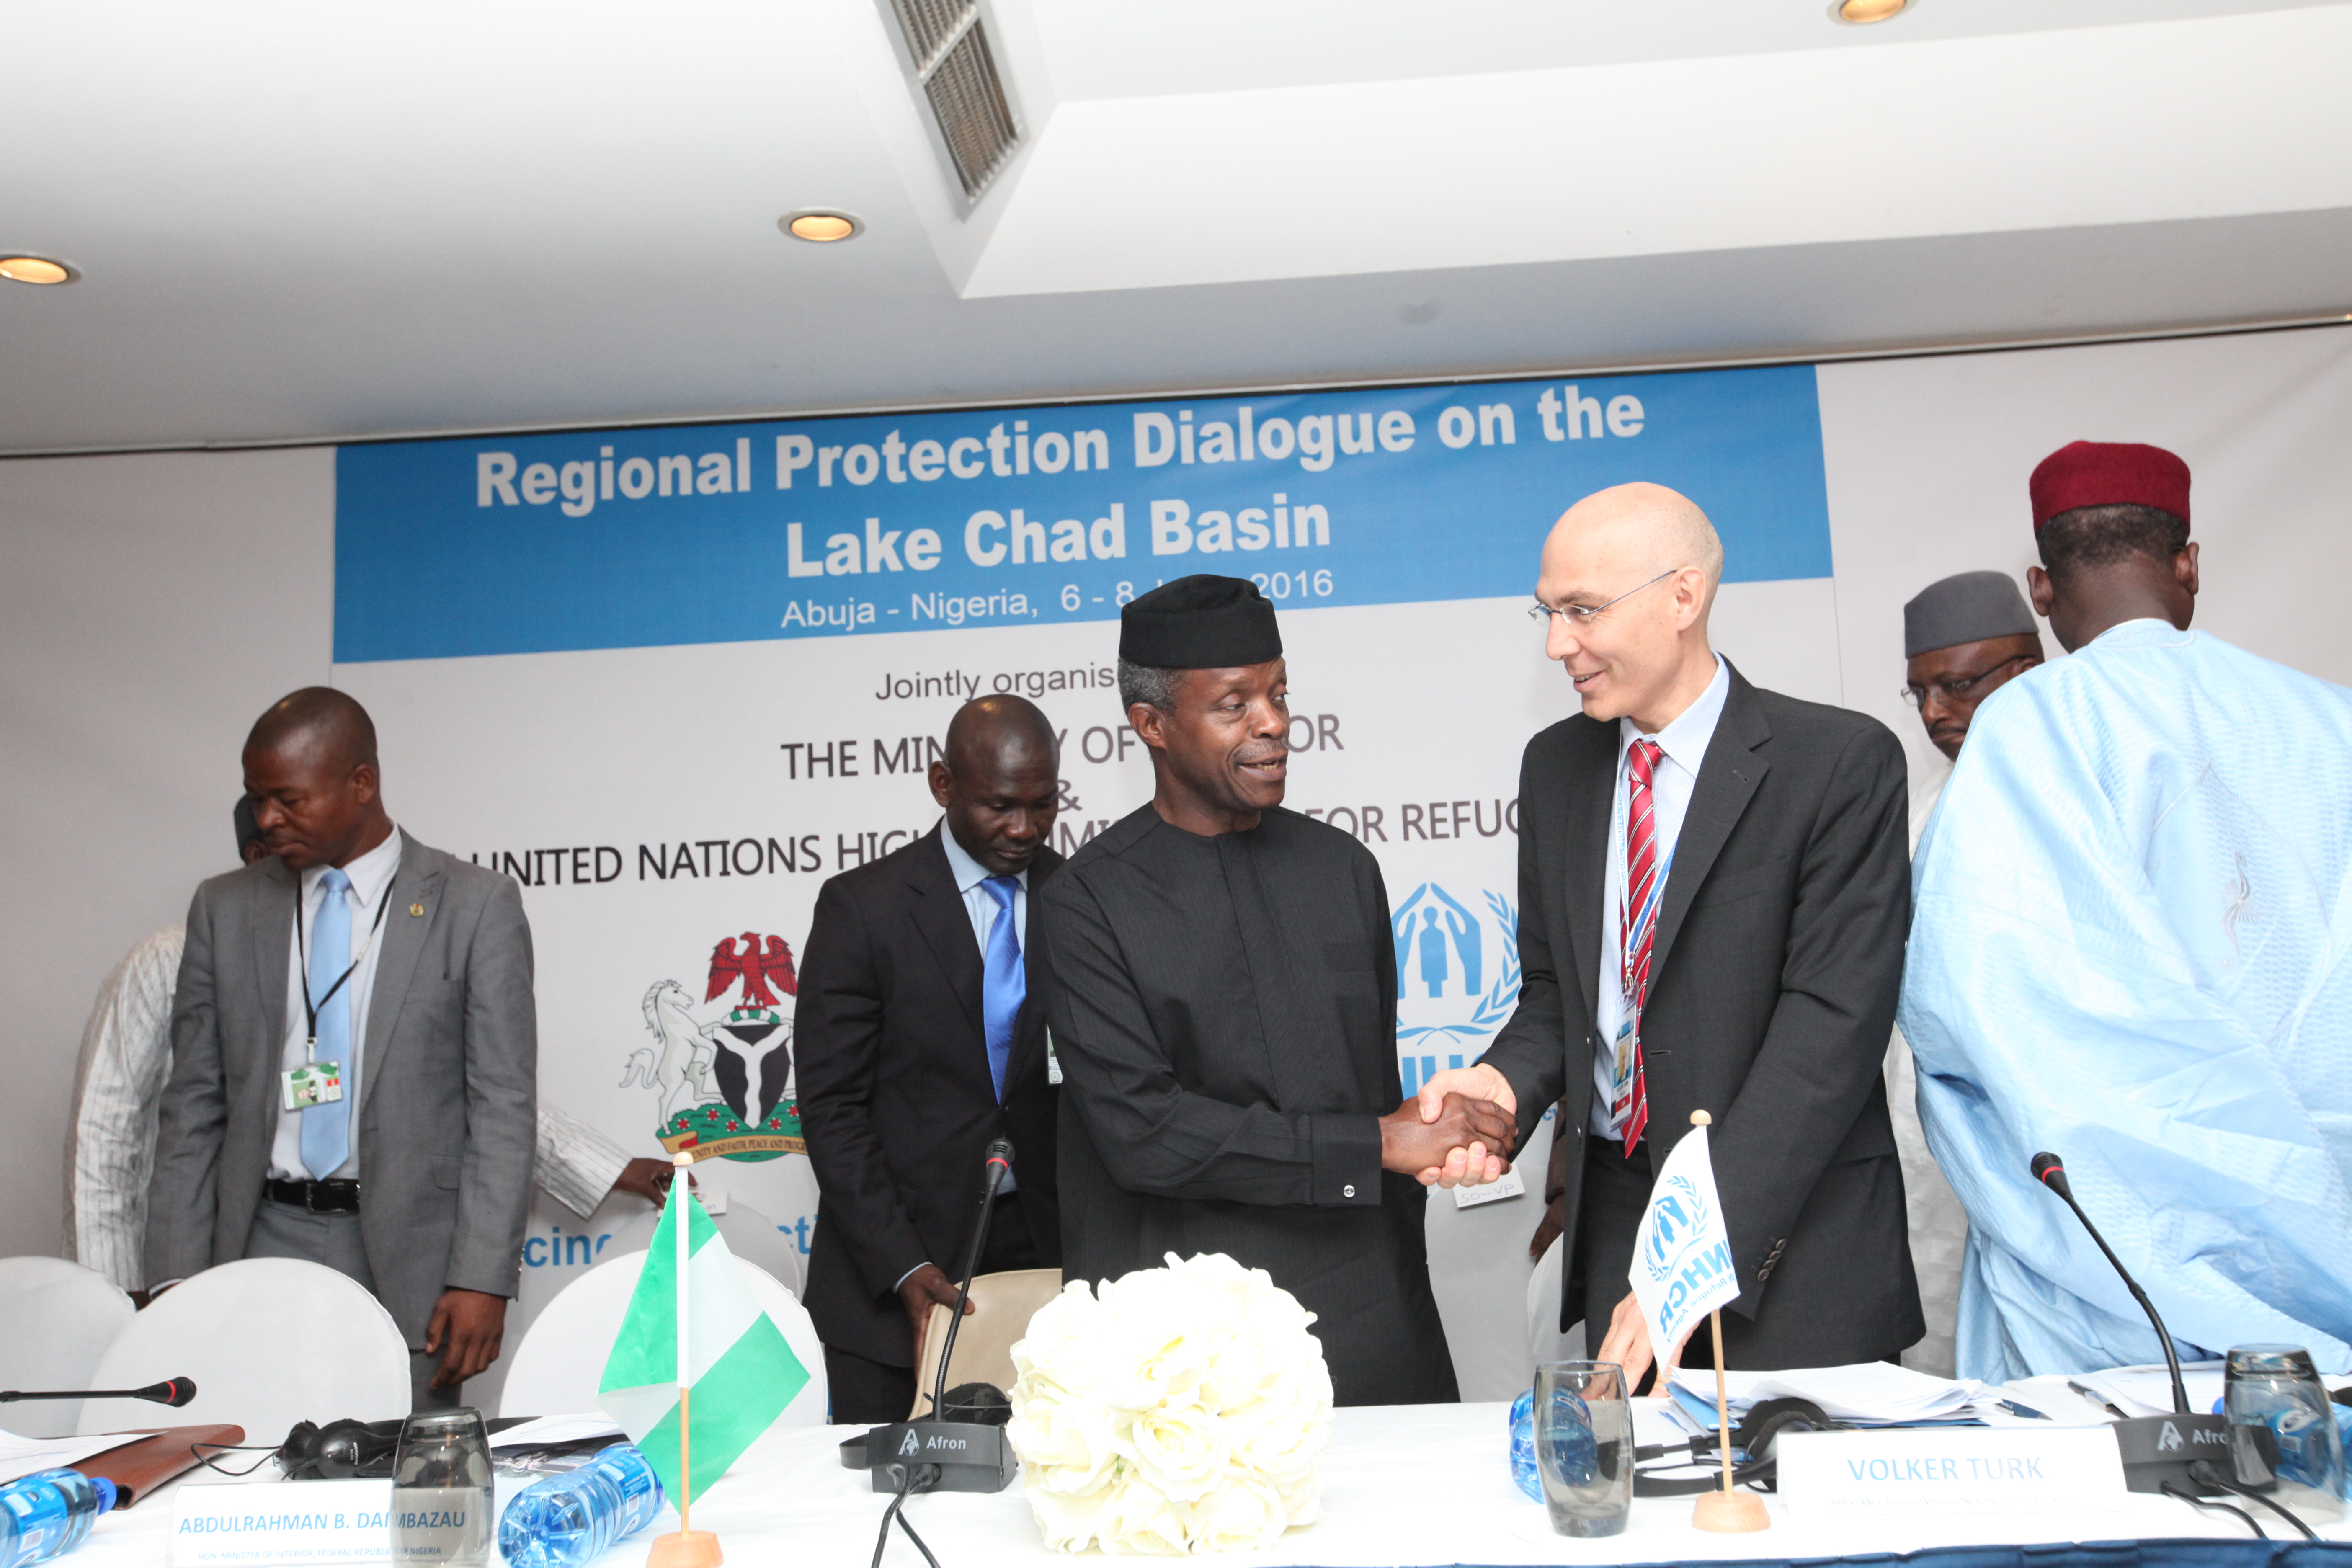 VP Osinbajo Attends Regional Protection Dialogue On Lake Chad Basin On 08/06/2016